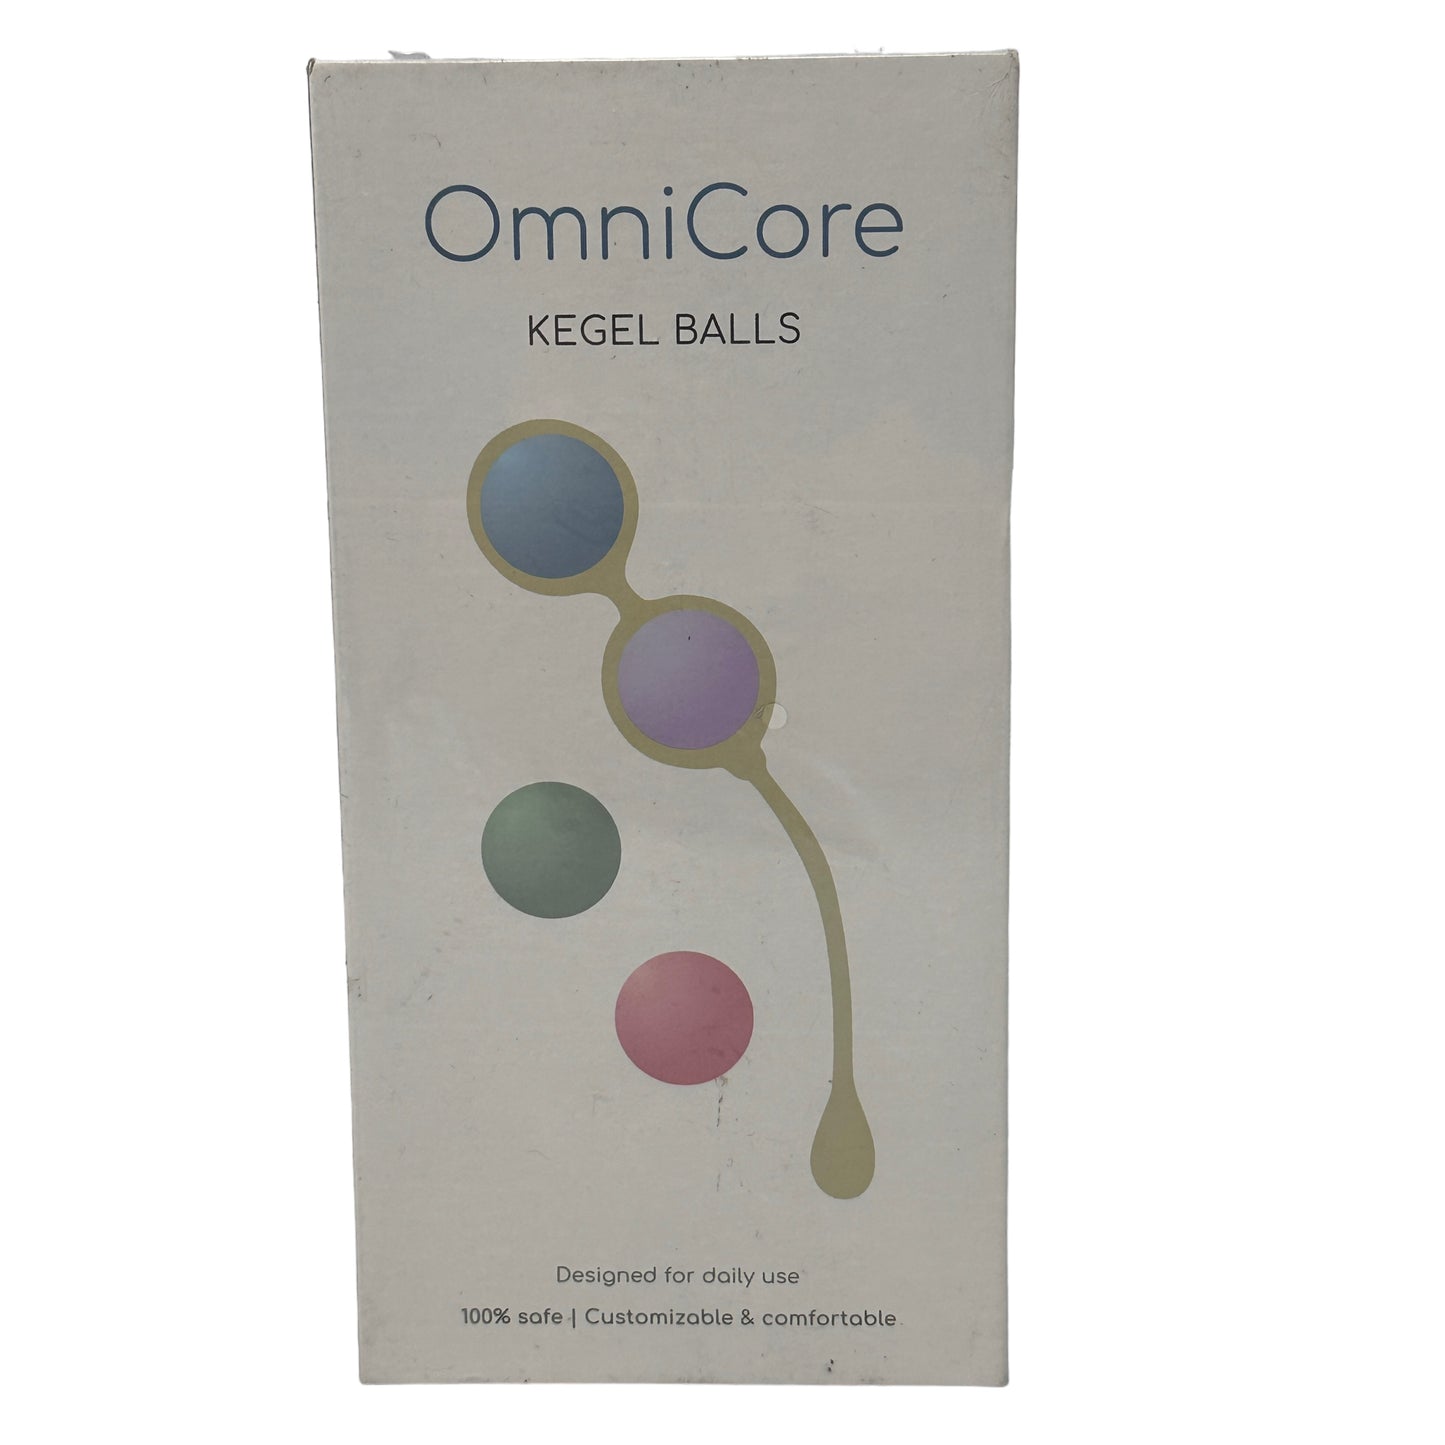 Omnicore Kegel Balls Fresh Forests Pelvic Tightening 4 Weights Complete Kit New